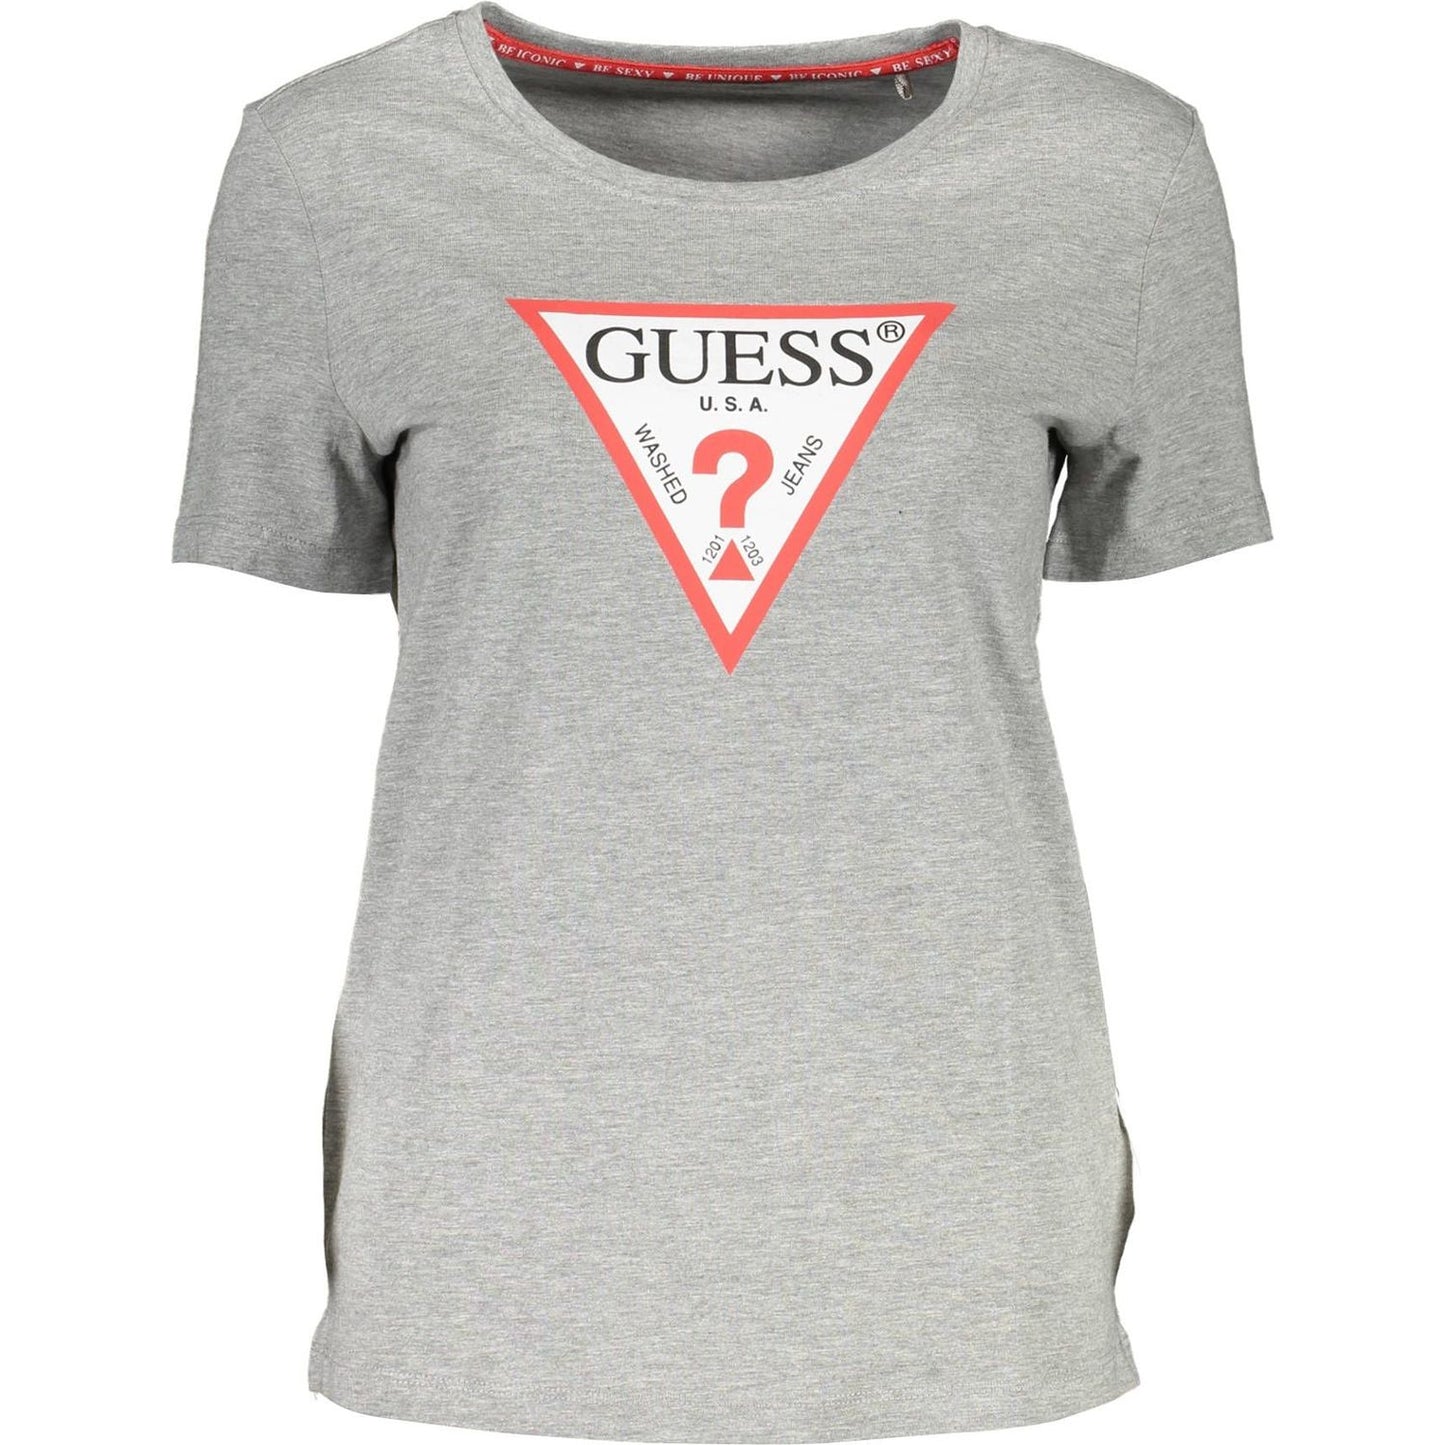 Guess Jeans Chic Gray Printed Logo Tee chic-gray-printed-logo-tee